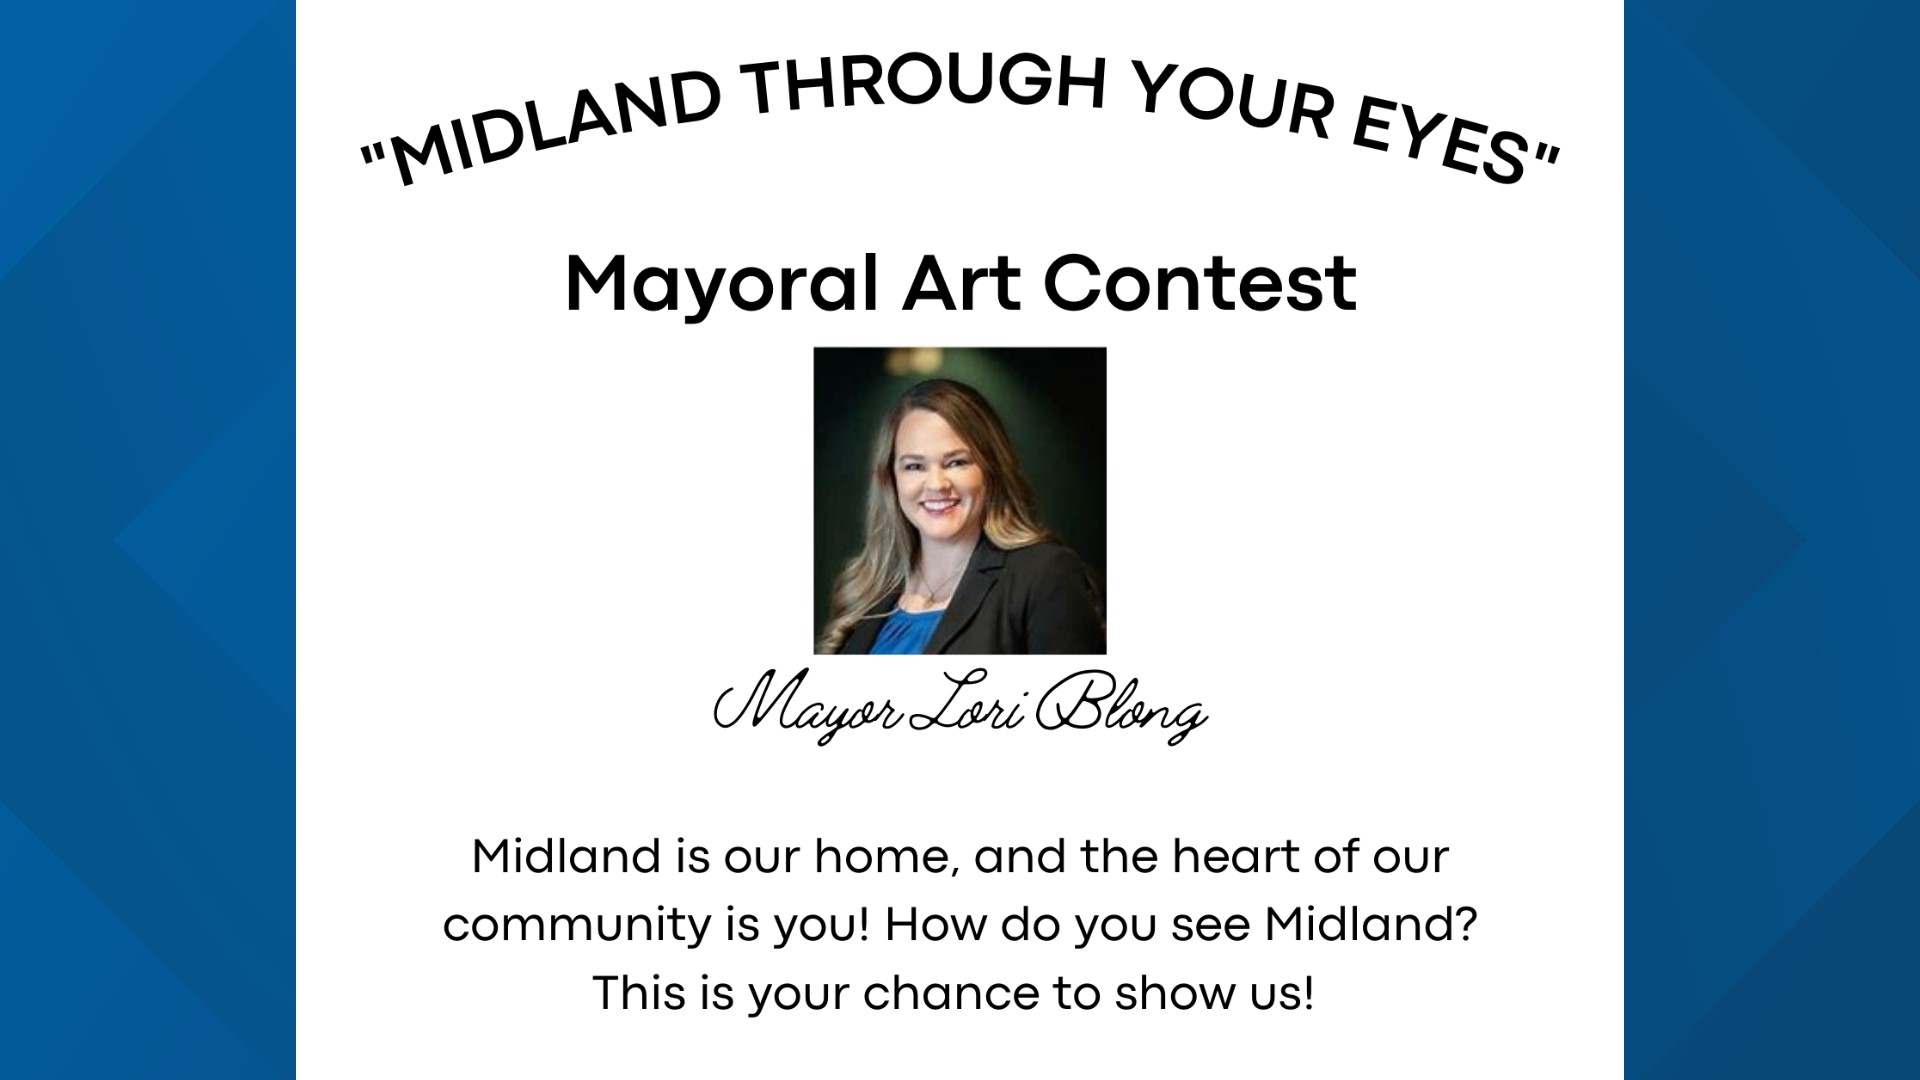 The art contest will be for Midland residents ages 5-18 and submissions are due by 5:00 p.m. on April 16.